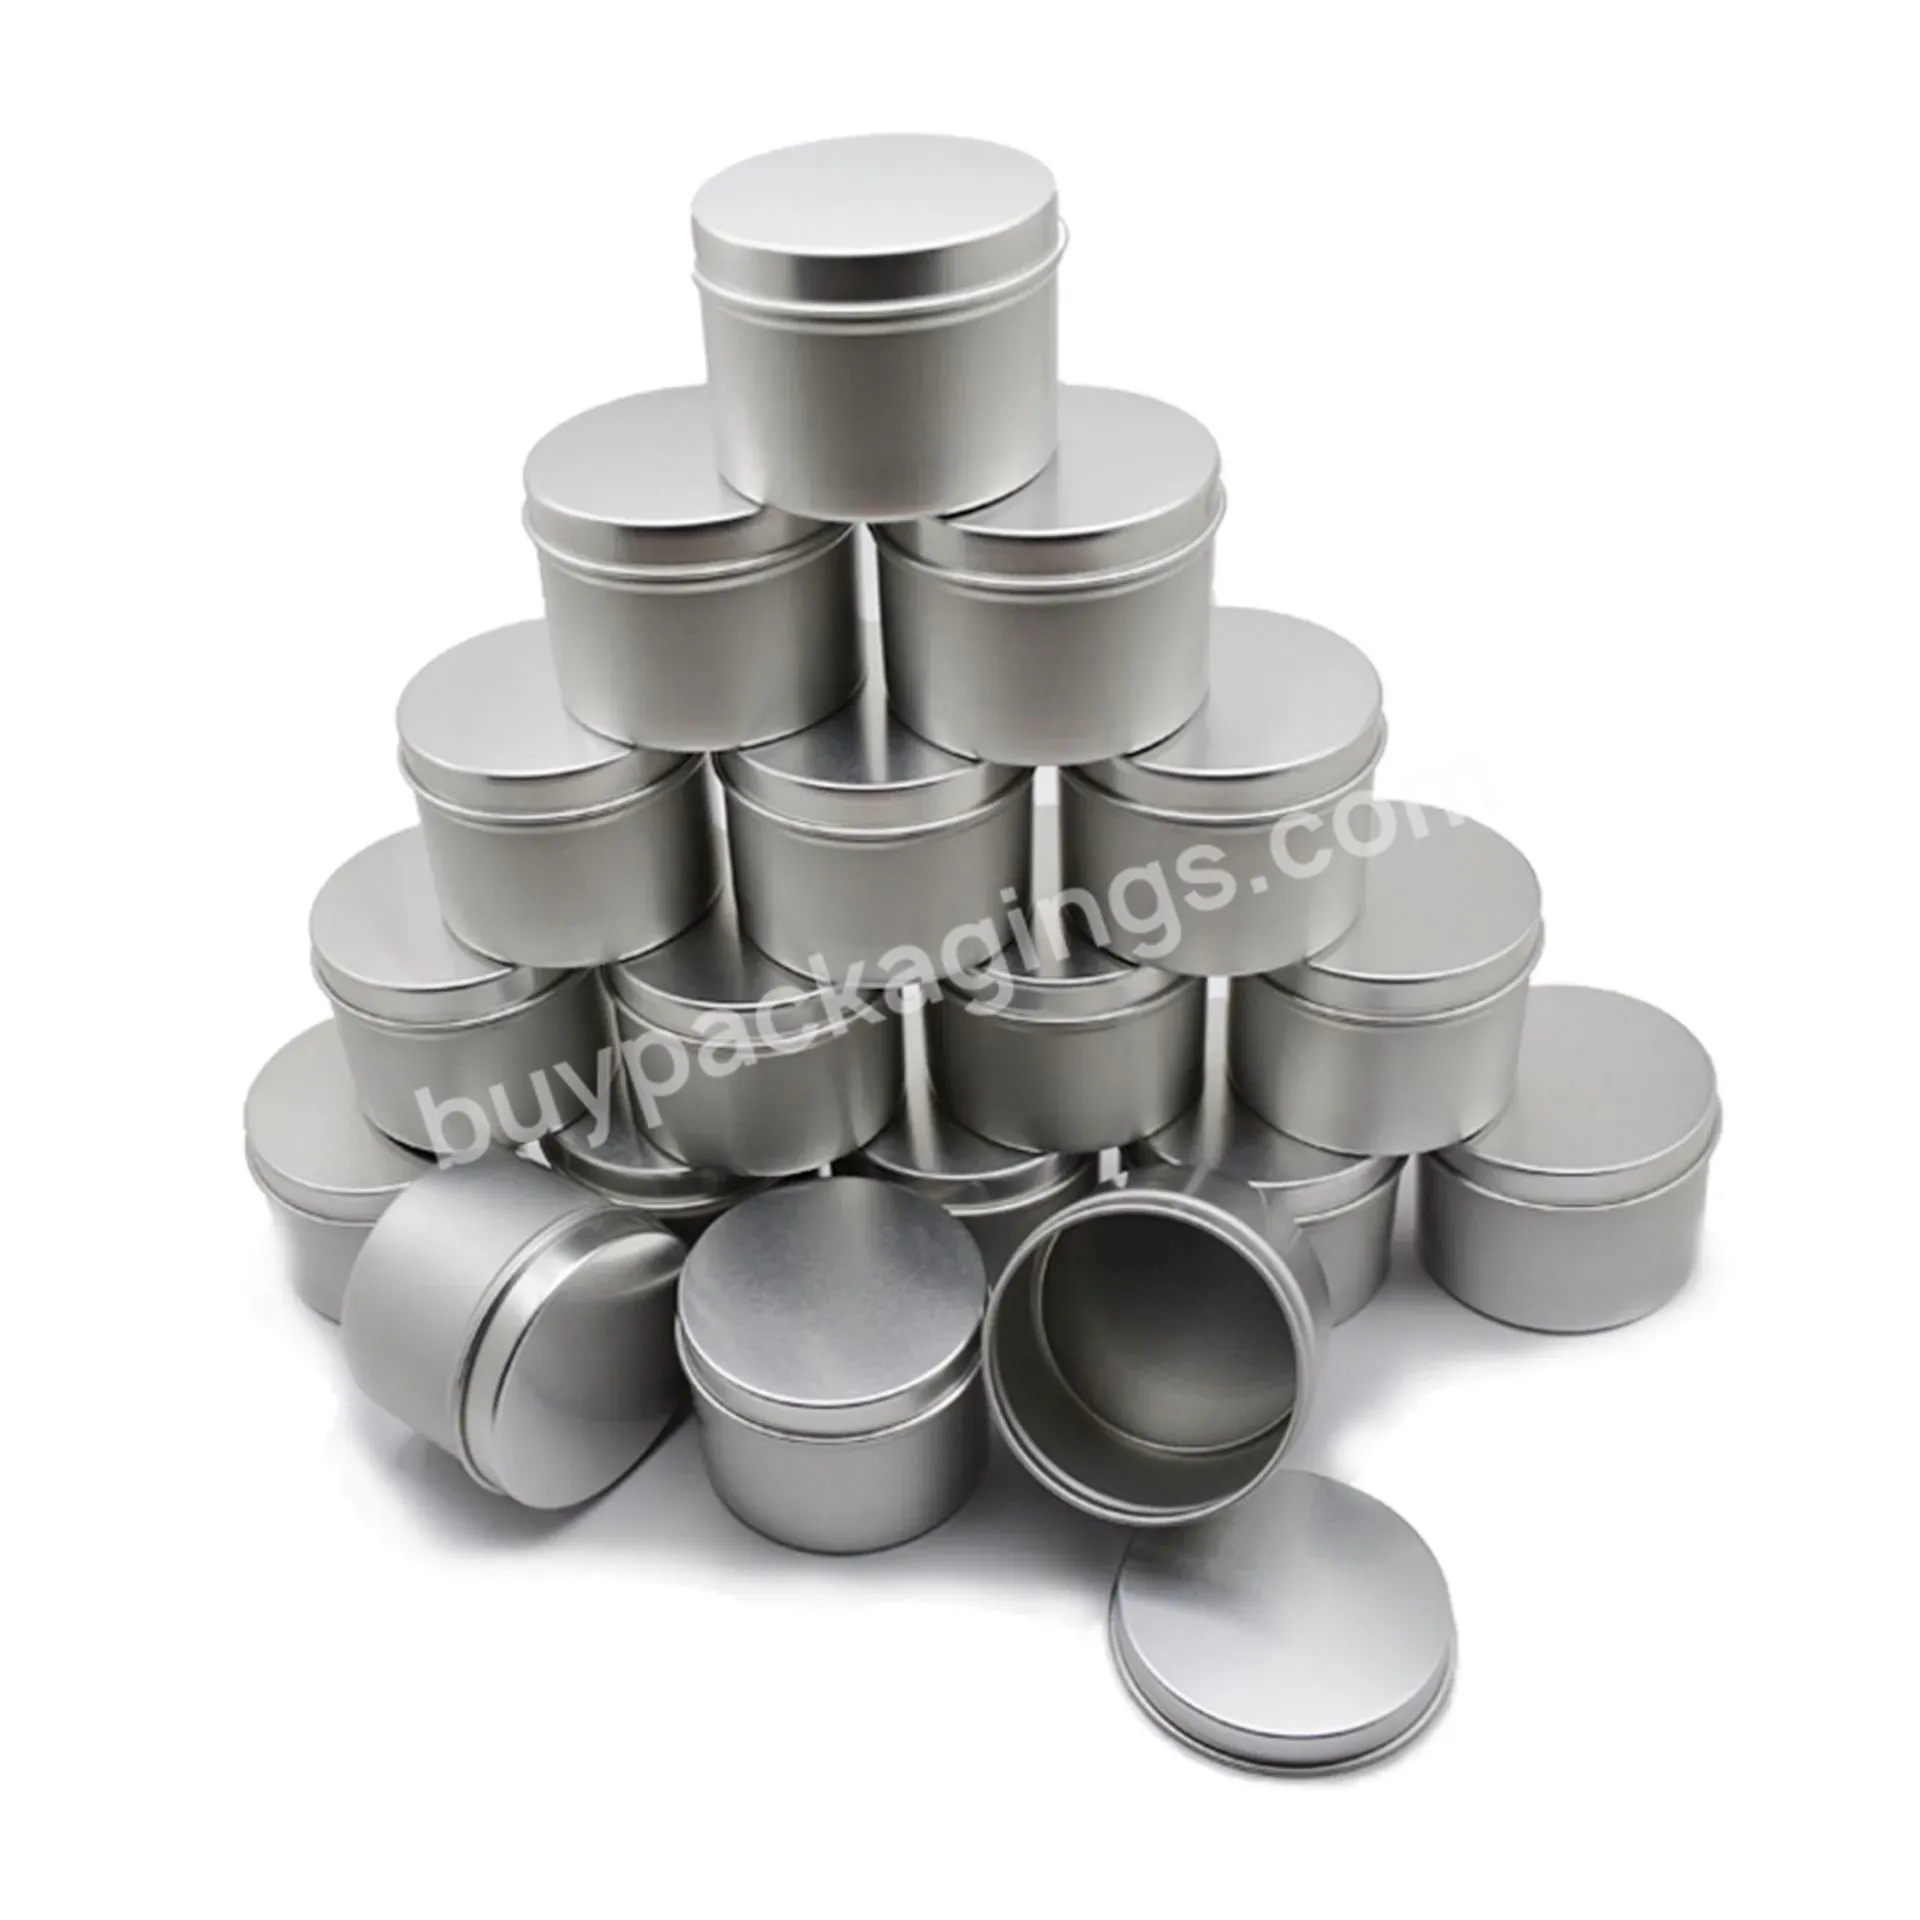 Hot Selling 18 Packs Of 3oz Aluminum Candle Tins Container Round Aluminum Tin Cans